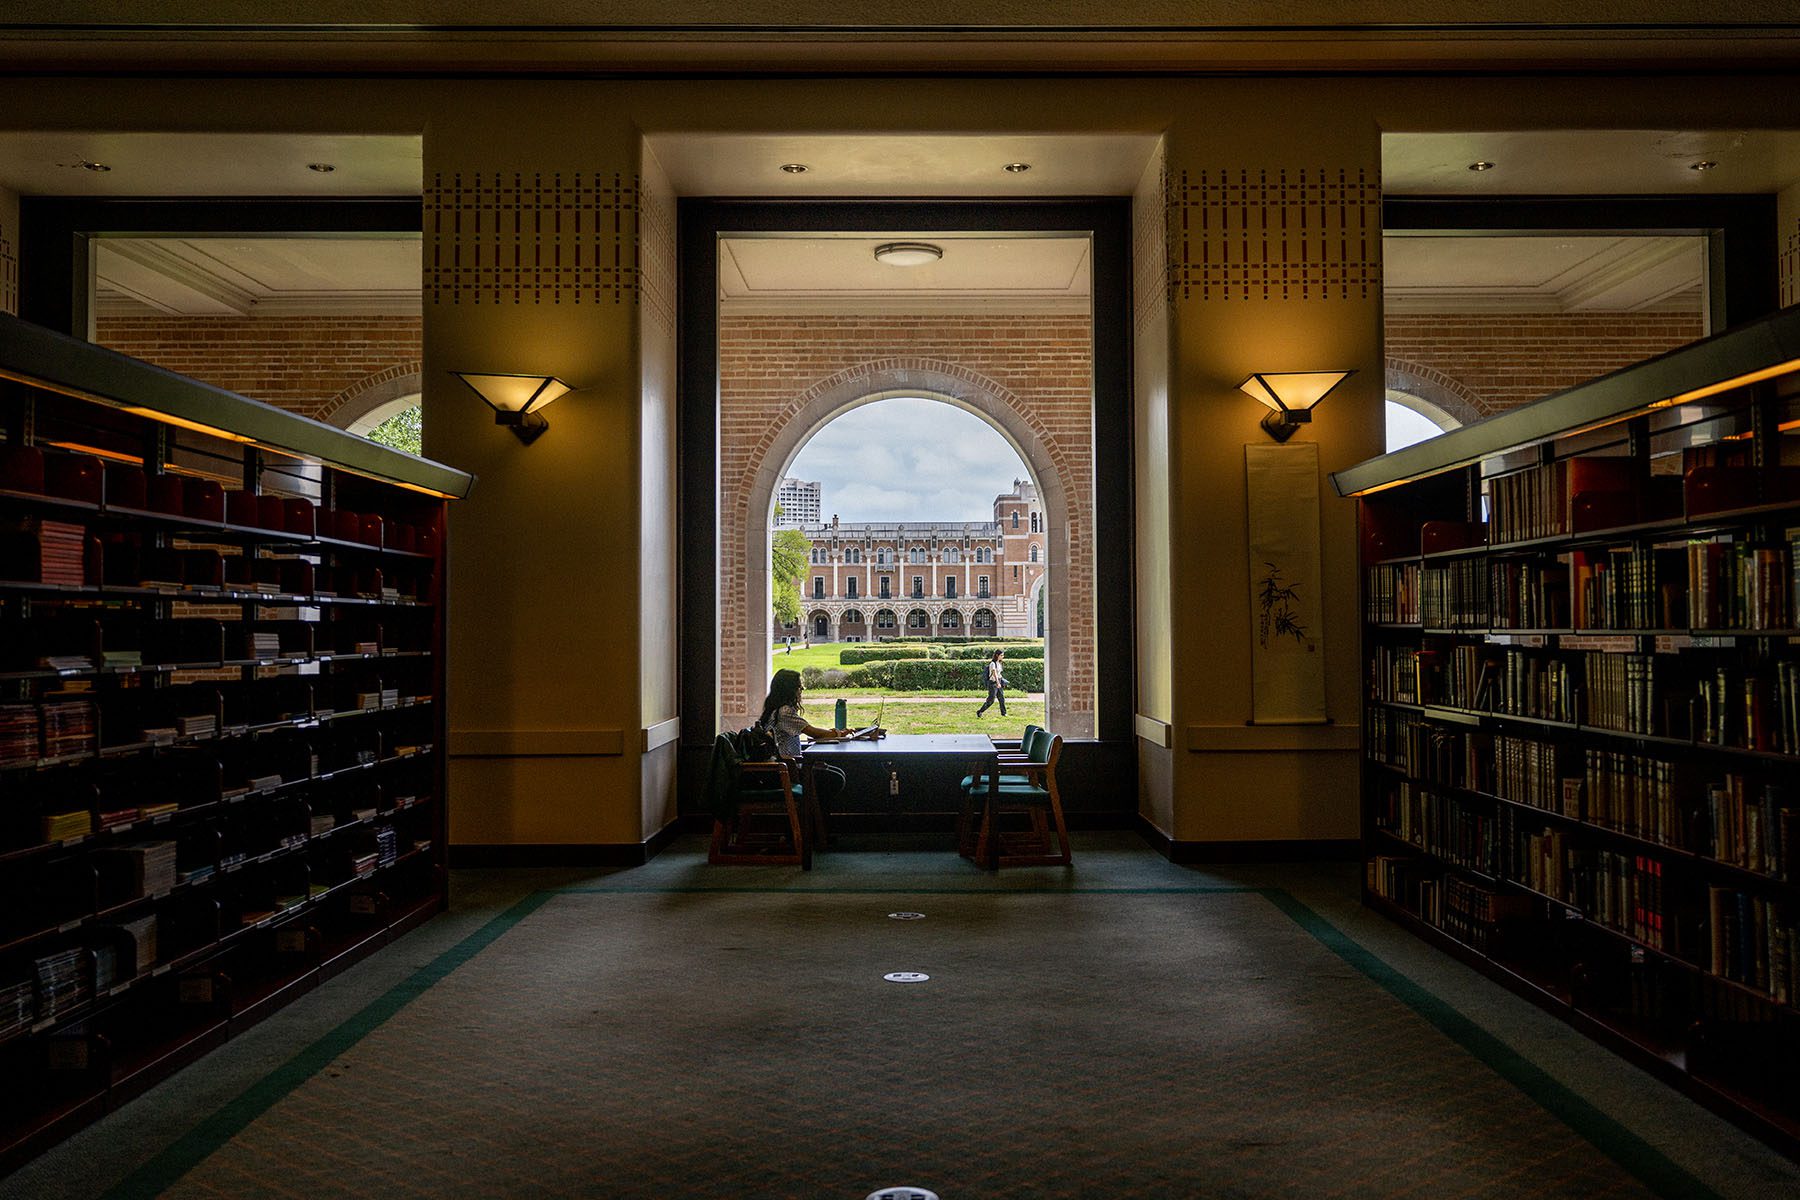 A student works at the Rice University Library in Houston, Texas.